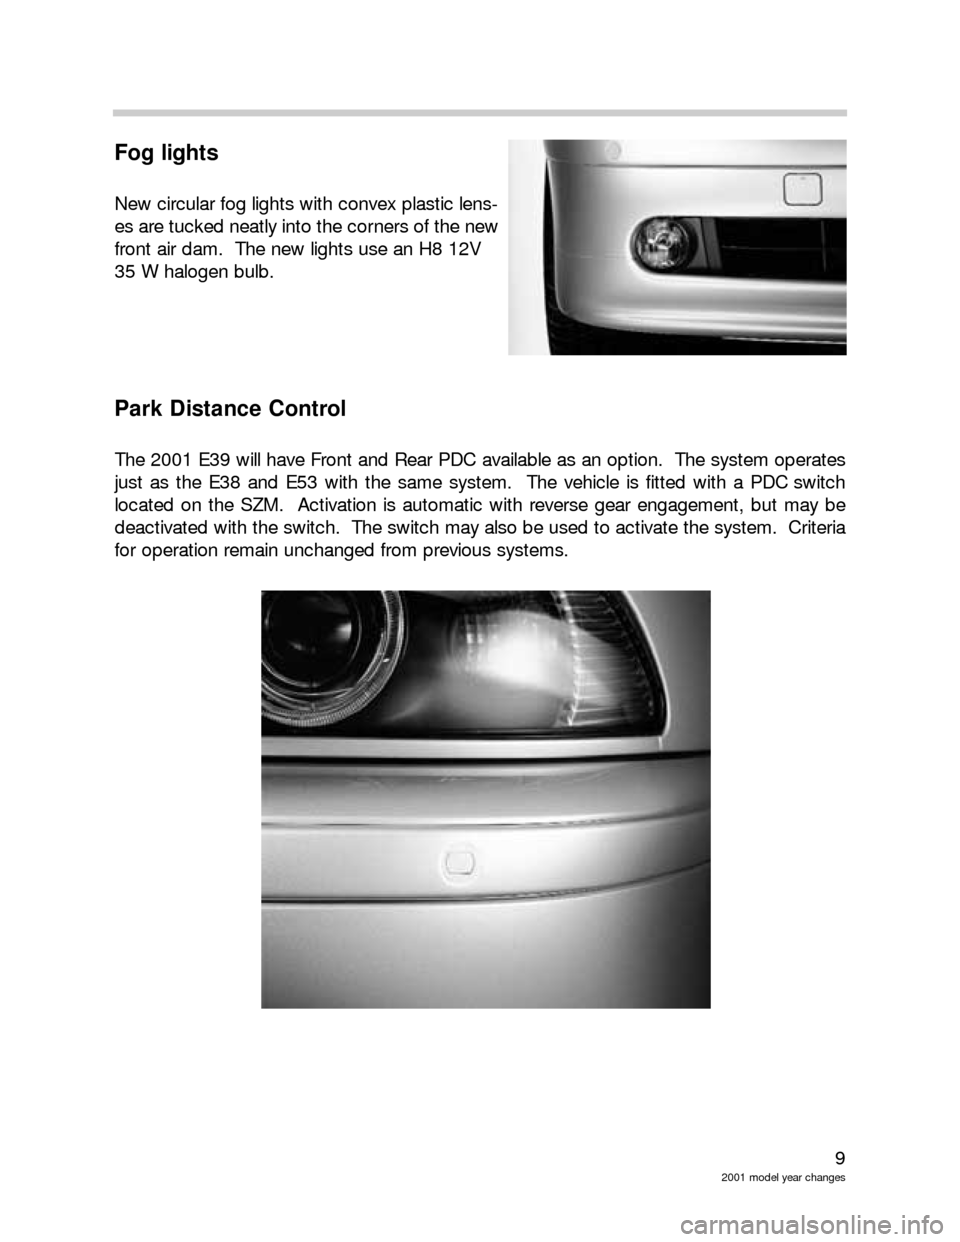 BMW 5 SERIES 2002 E39 Model Yar Changes 9
2001 model year changes
Fog lights
New circular fog lights with convex plastic lens-
es are tucked neatly into the corners of the new
front air dam.  The new lights use an H8 12V 
35 W halogen bulb.